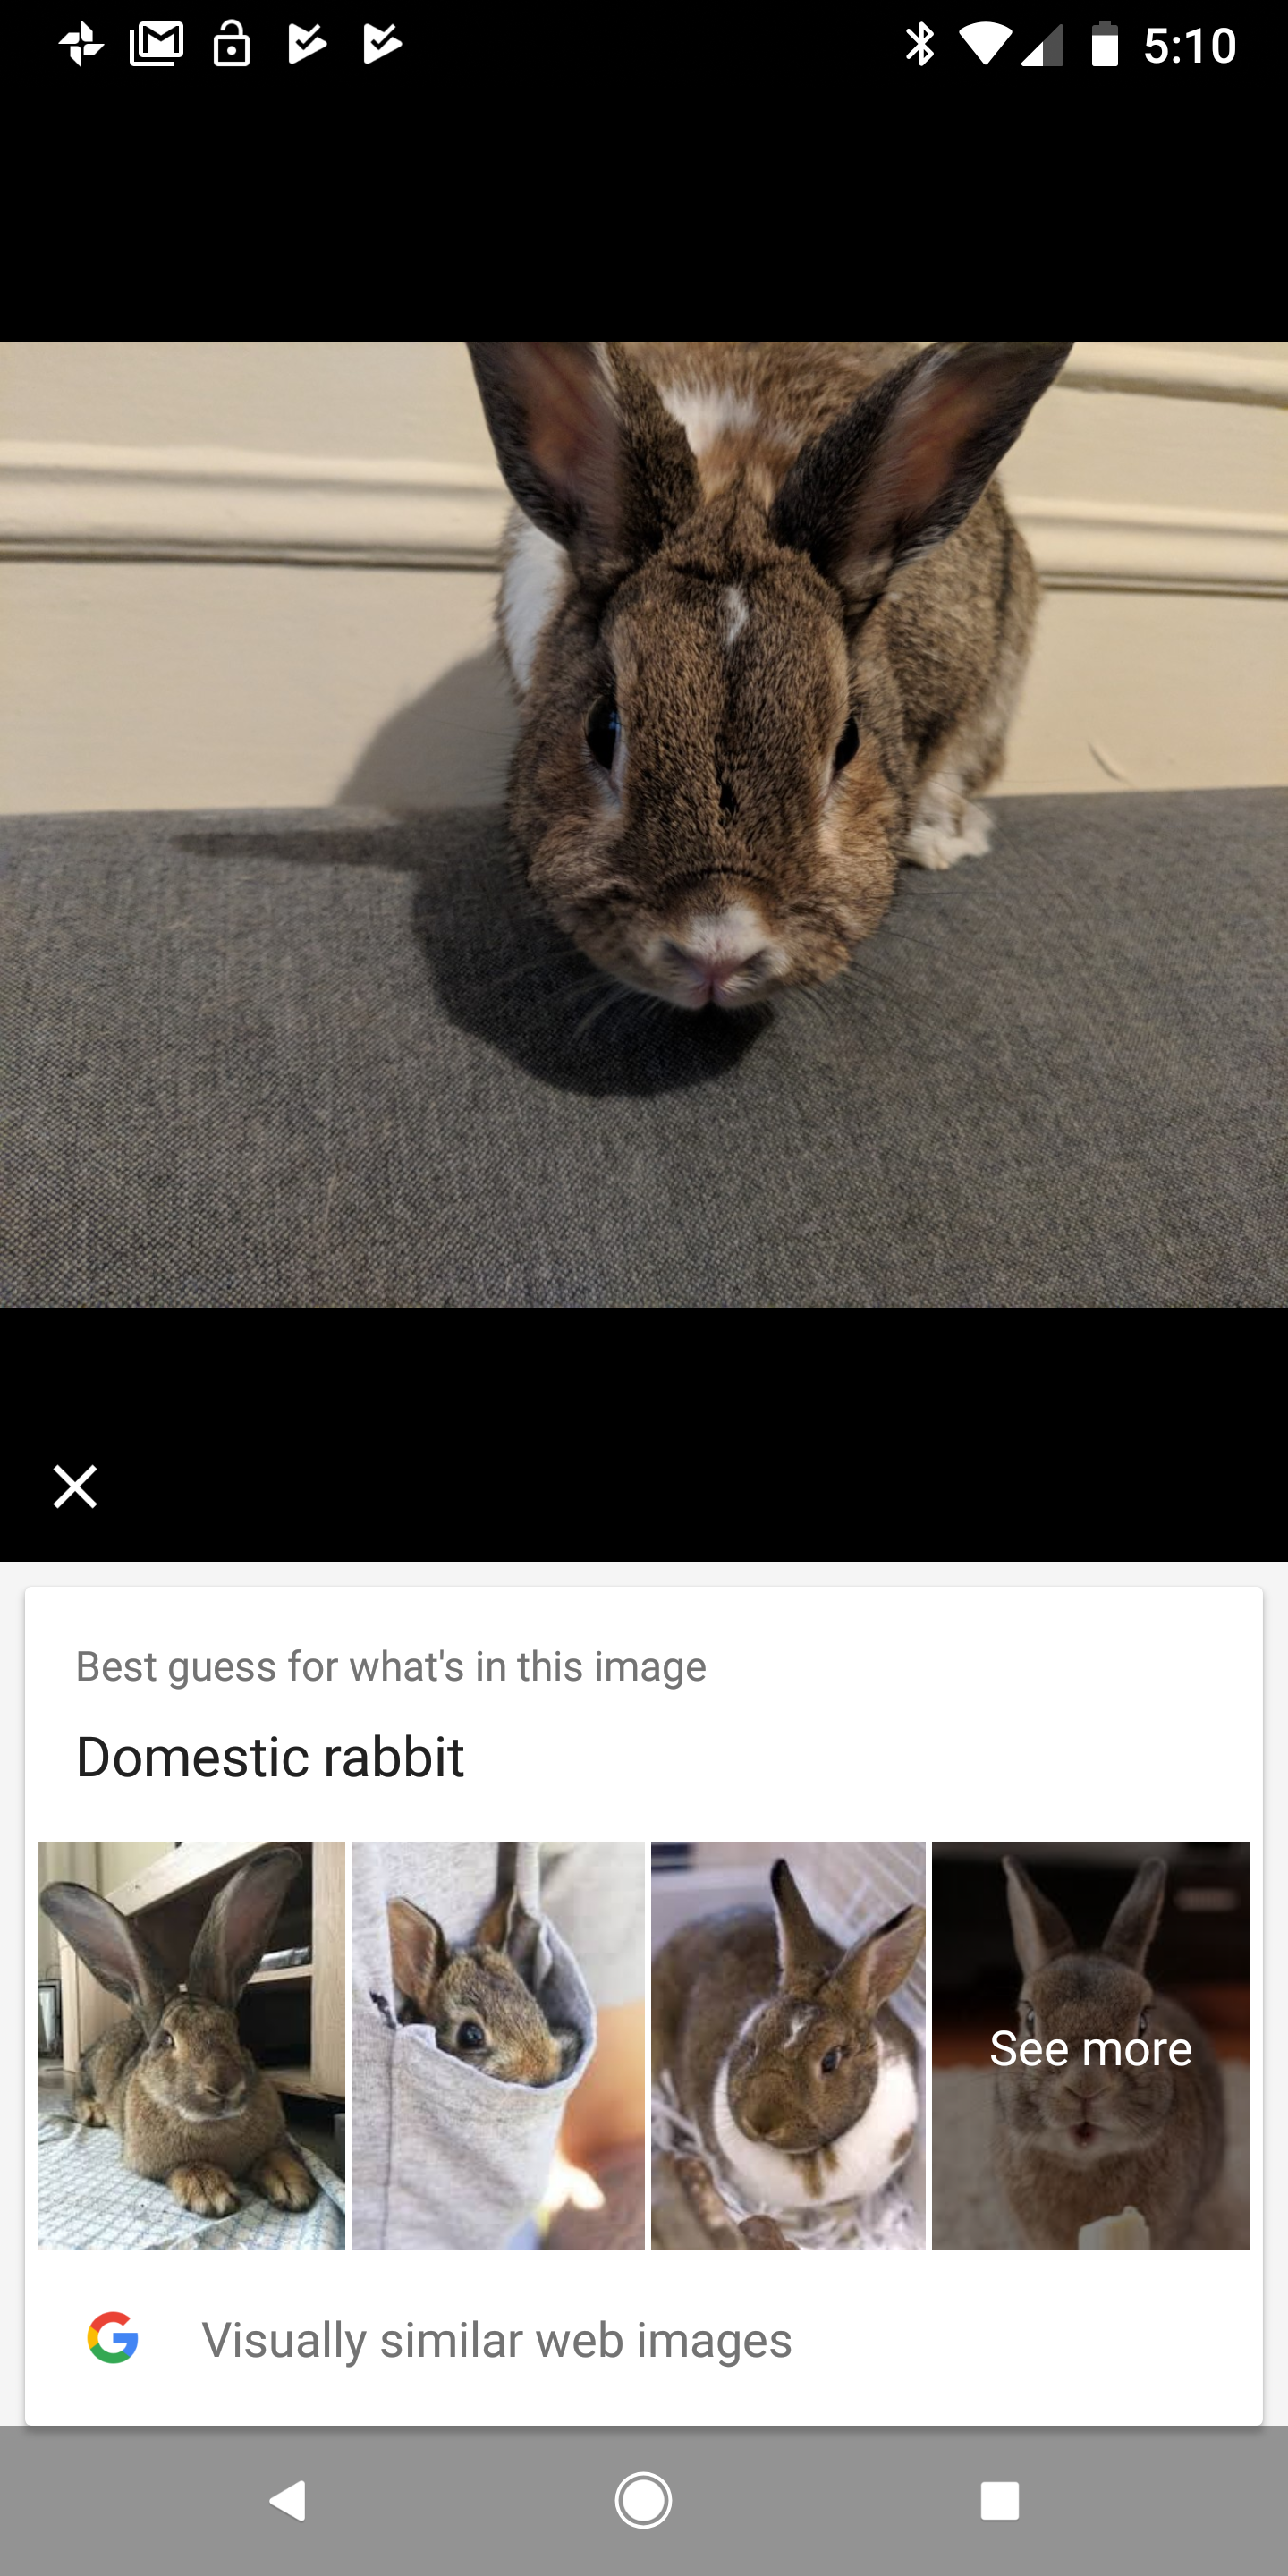 Google Lens on Pixel 2 still has a long way to go